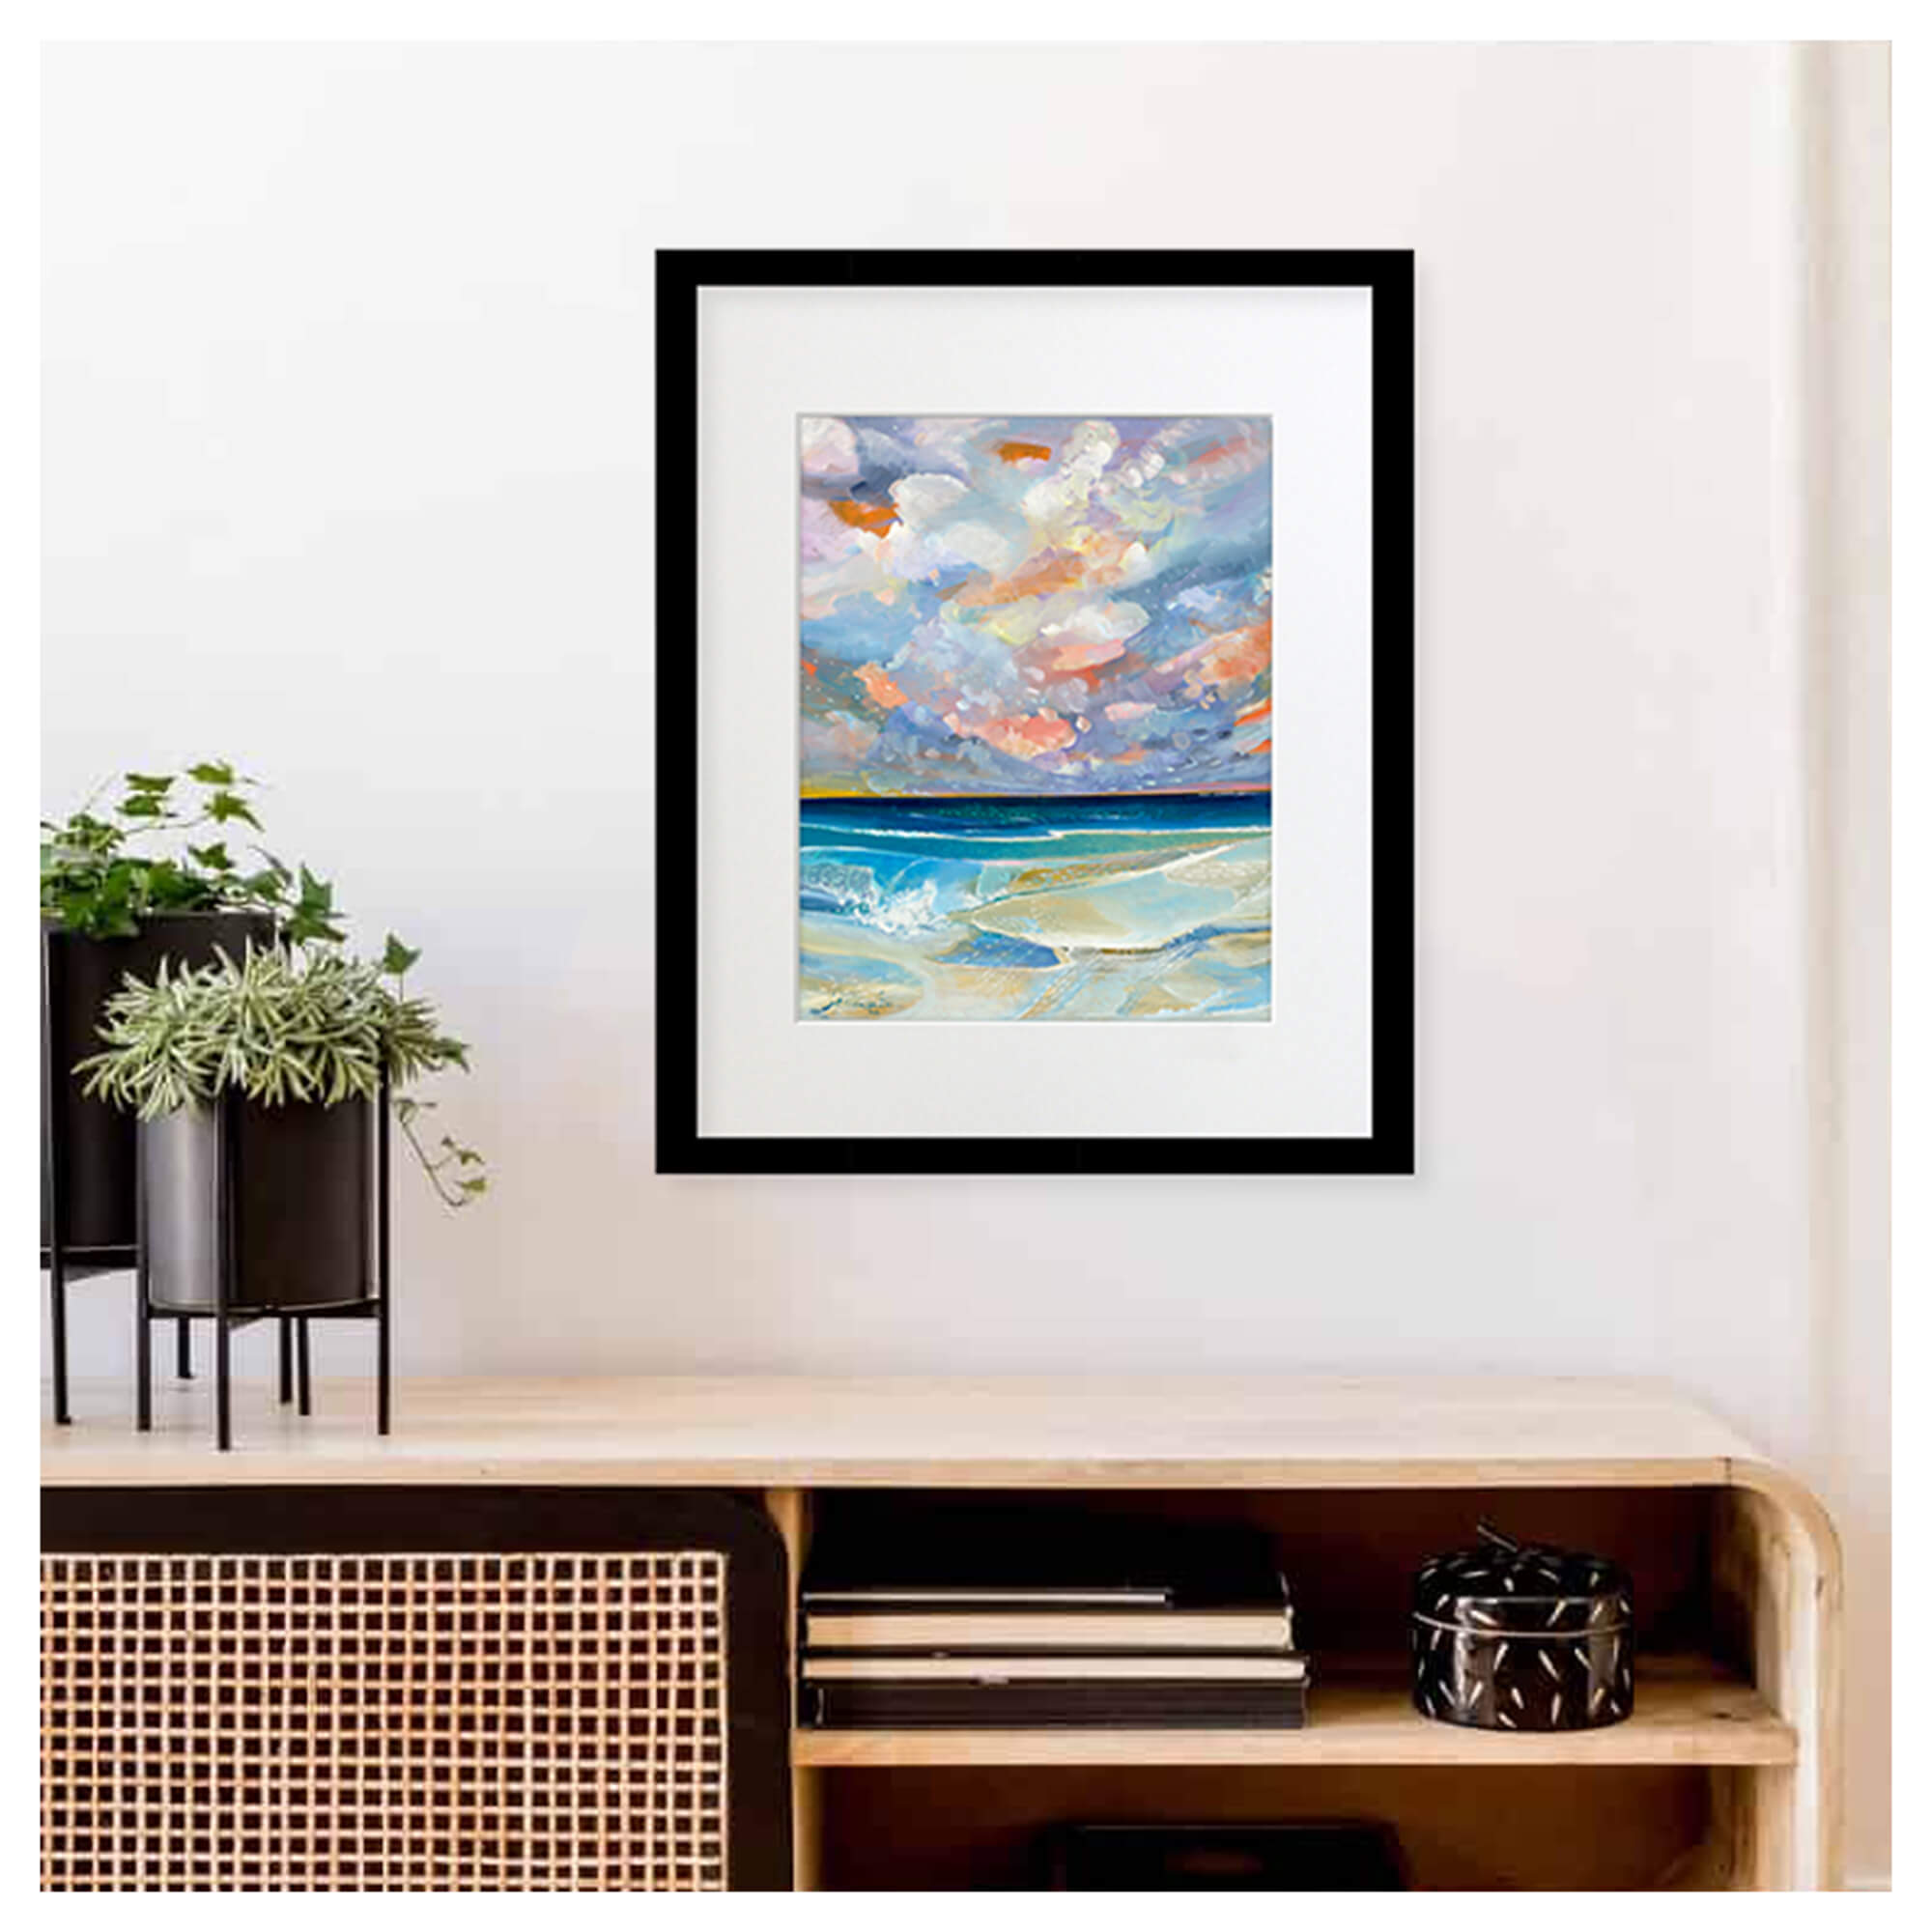 A framed matted art print featuring abstract teal and blue tinted waves crashing towards the shore by popular Hawaii artist Saumolia Puapuaga